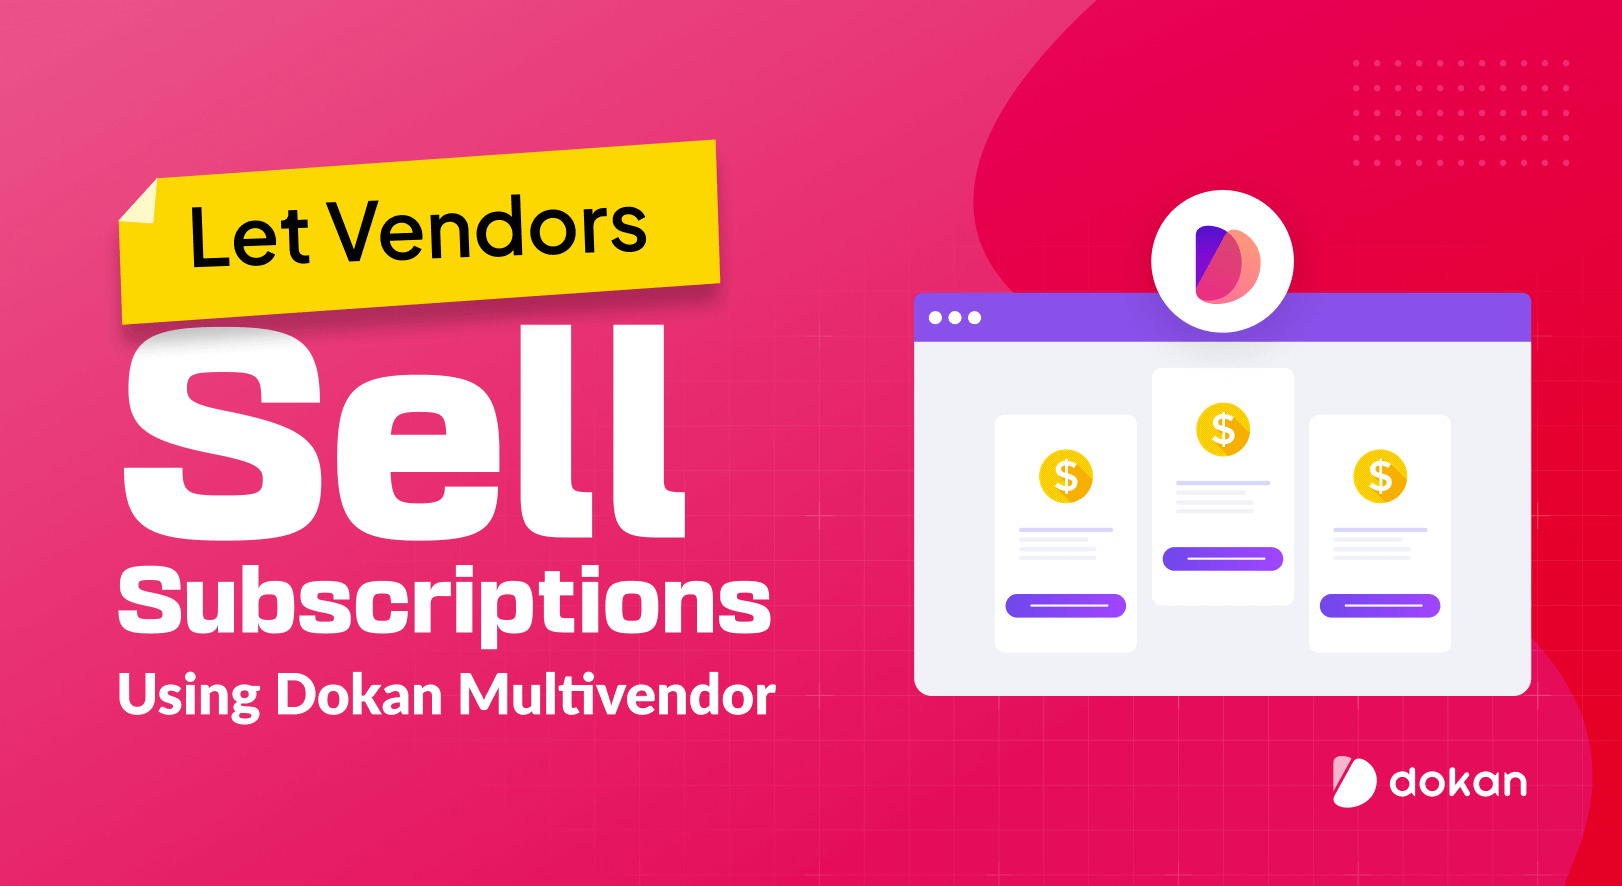 How to Let Vendors Sell Subscriptions Using Dokan Multivendor